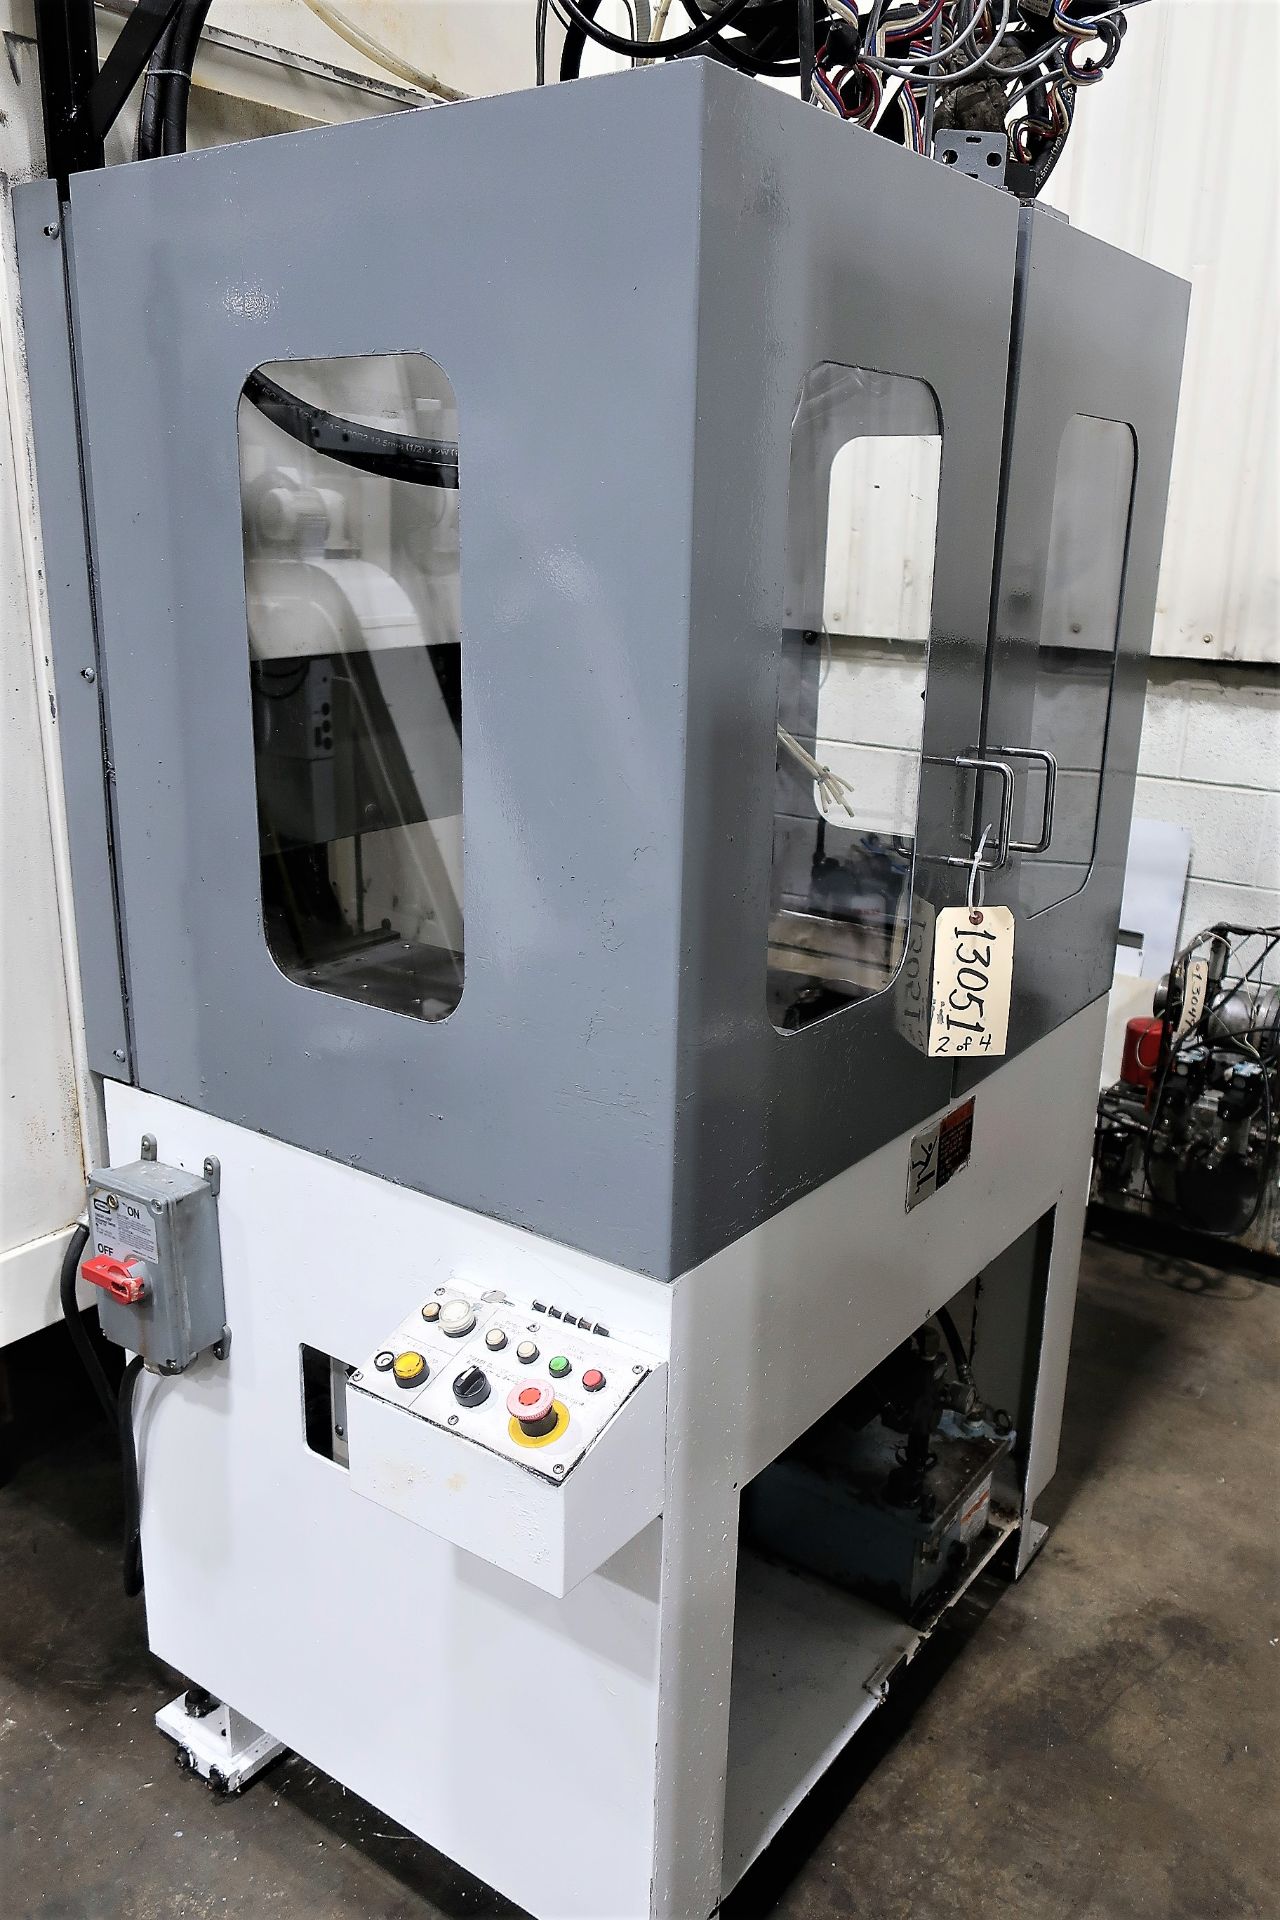 Fanuc Robodrill Alpha T21iFLA CNC Drill Tap Vertical Machining Center w/Pallet Changer, S/N P105XH22 - Image 9 of 10